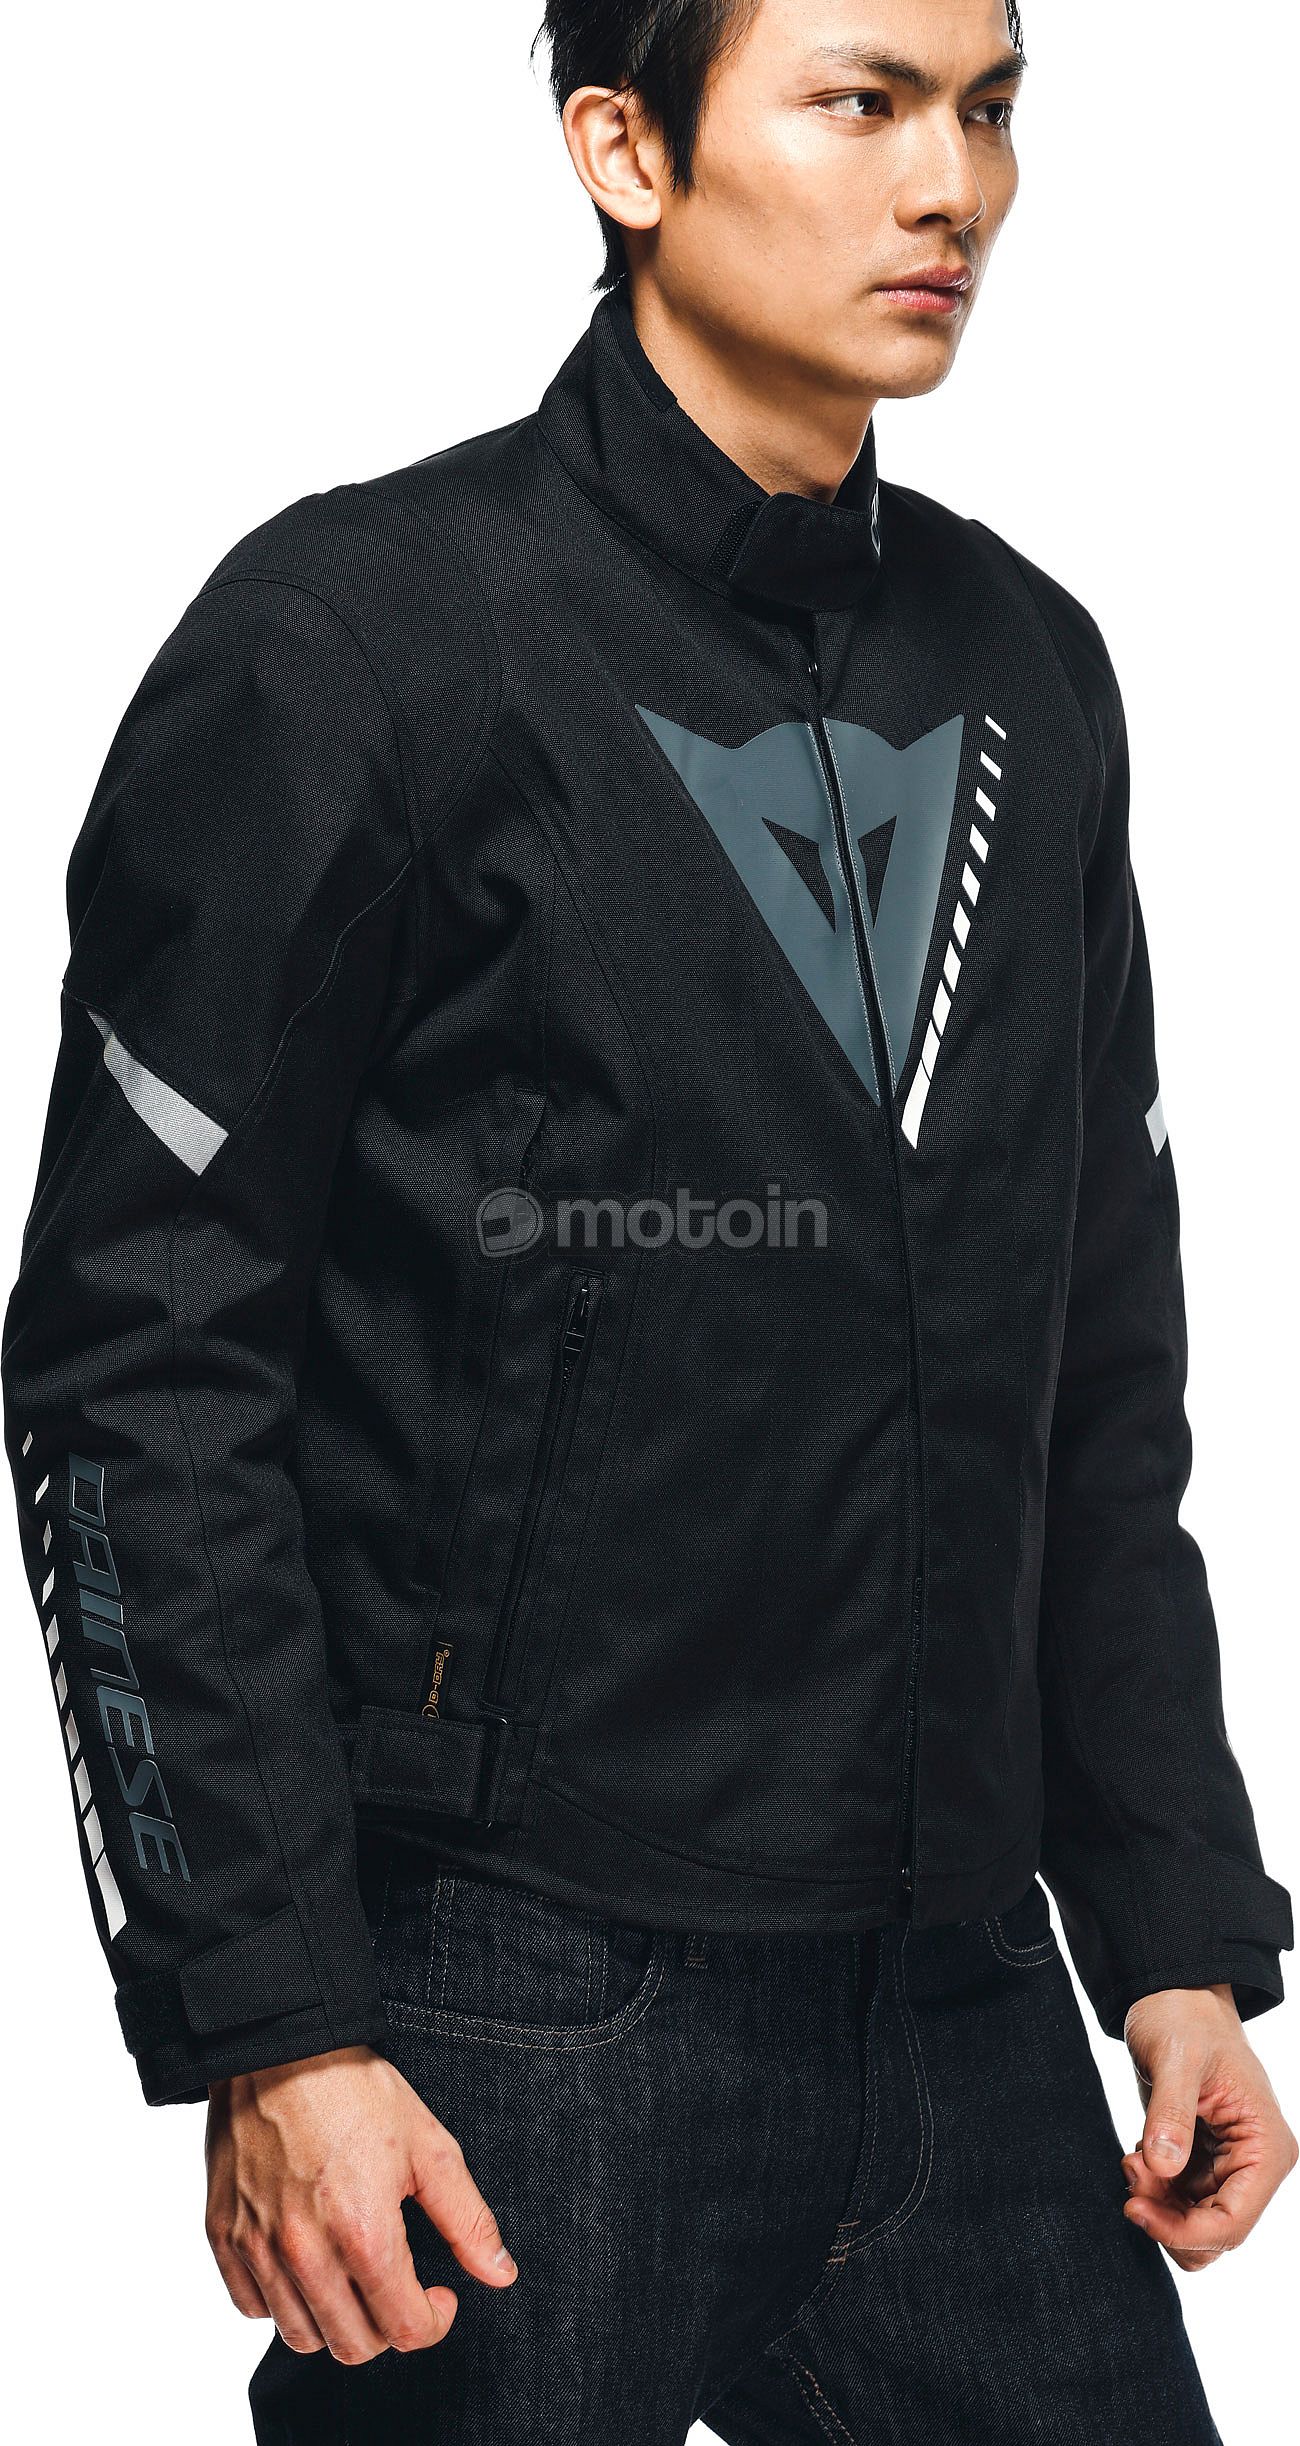 Dainese Dainese Veloce D-Dry Motorcycle Jacket 